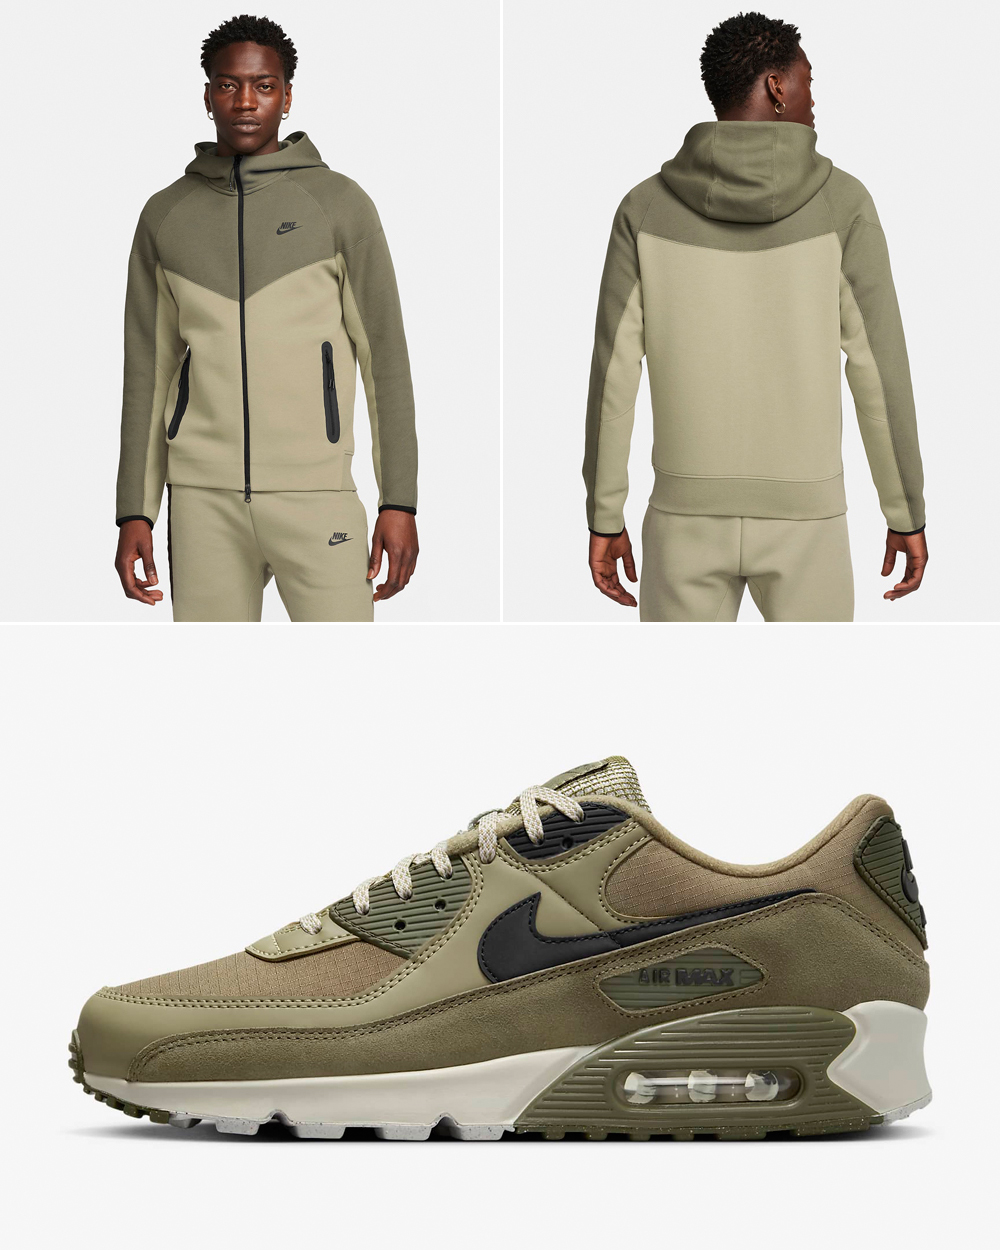 Nike-Air-Max-90-Neutral-Olive-Medium-Olive-Tech-Fleece-Hoodie-Jogger-Pants-Outfit